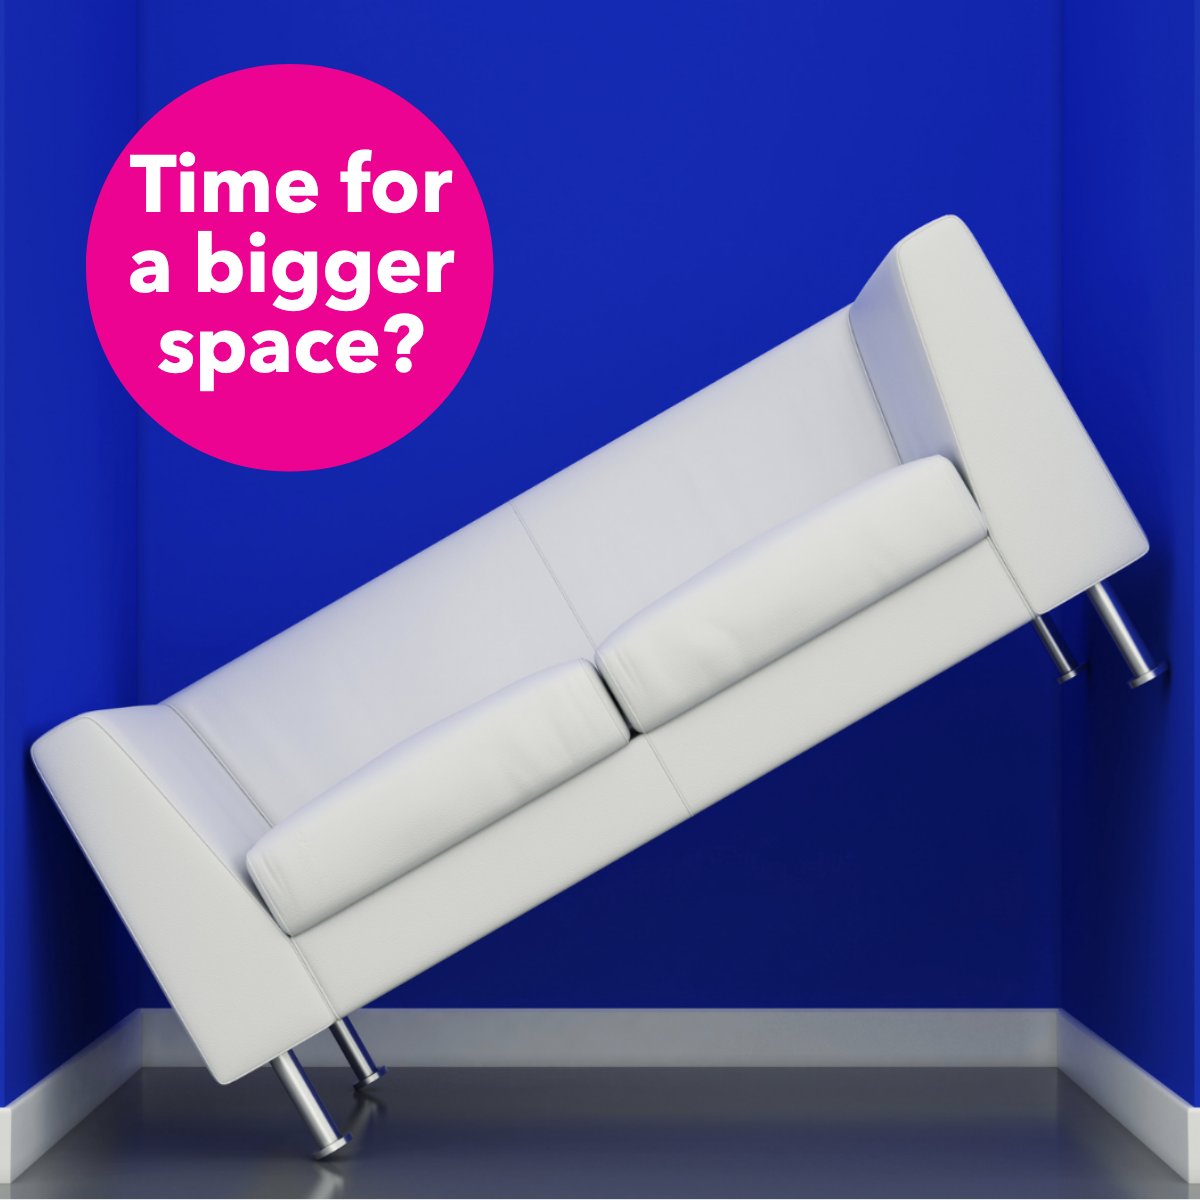 Are you ready for a bigger space? 🤔 Let us know below! #spaces #spacedesign #spacer #biggerspaces #cherylcitro